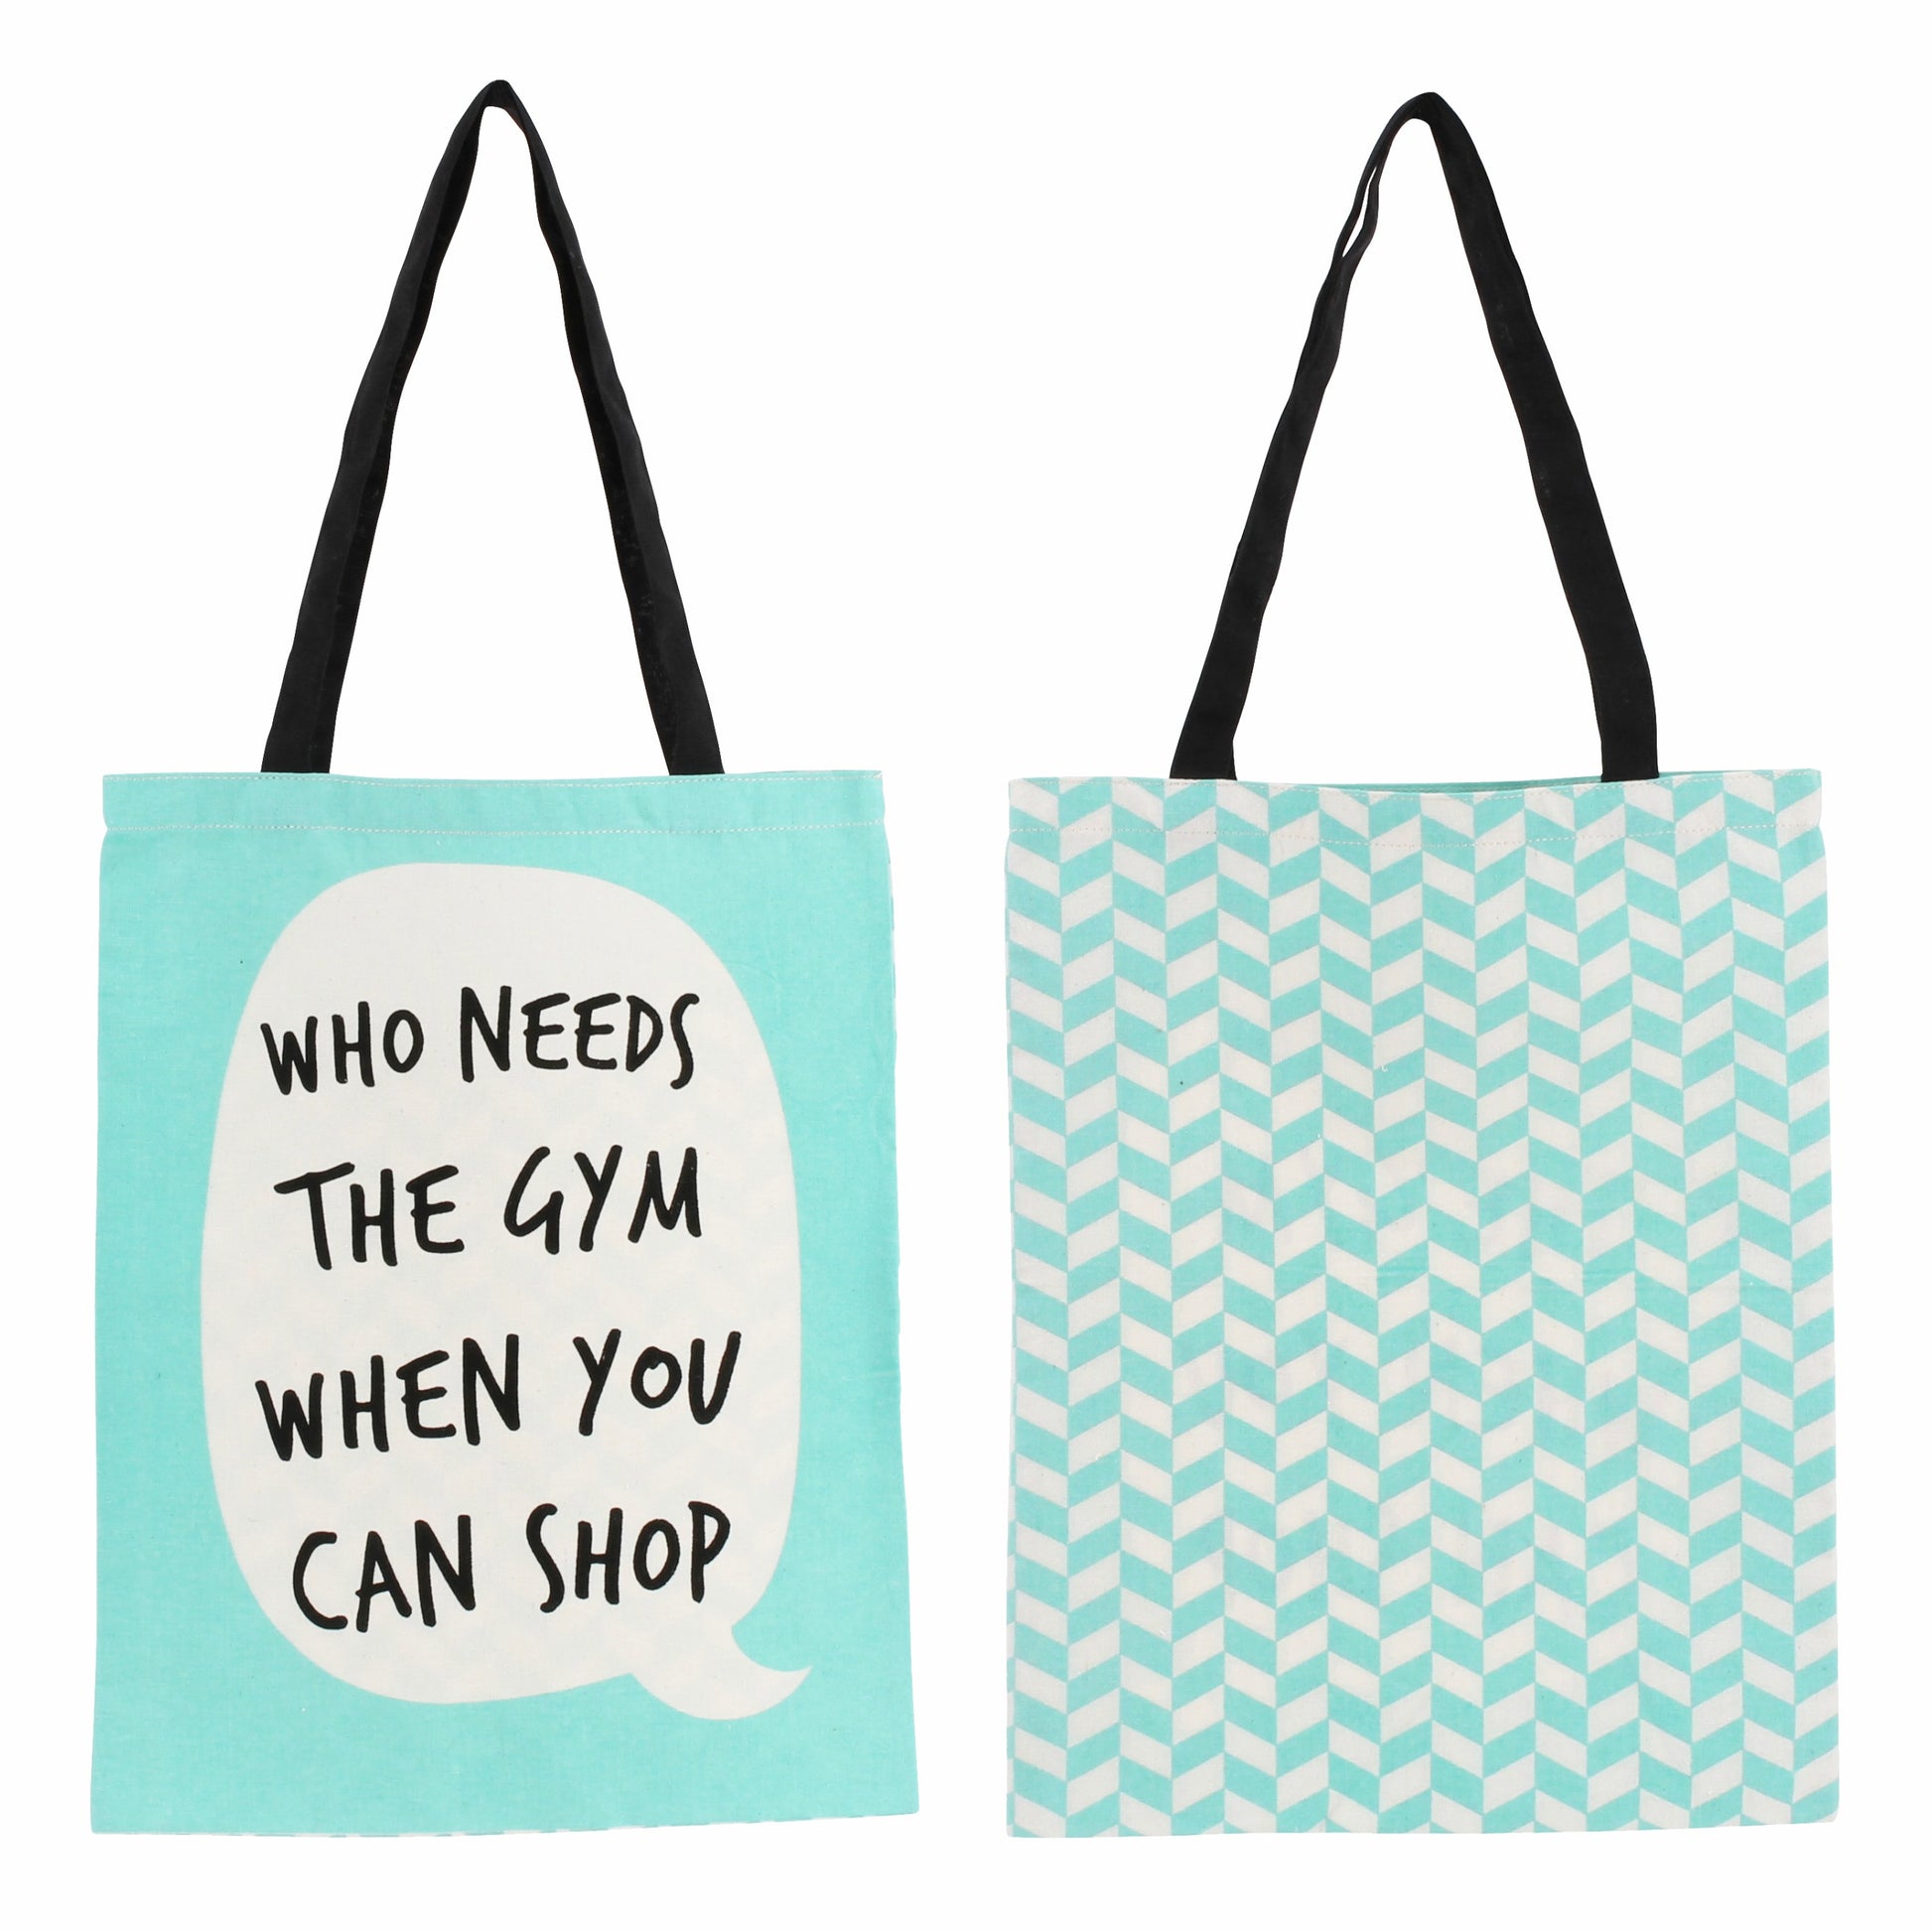 Green shopping tote bag with speech bubble that says who needs the gym when you can shop